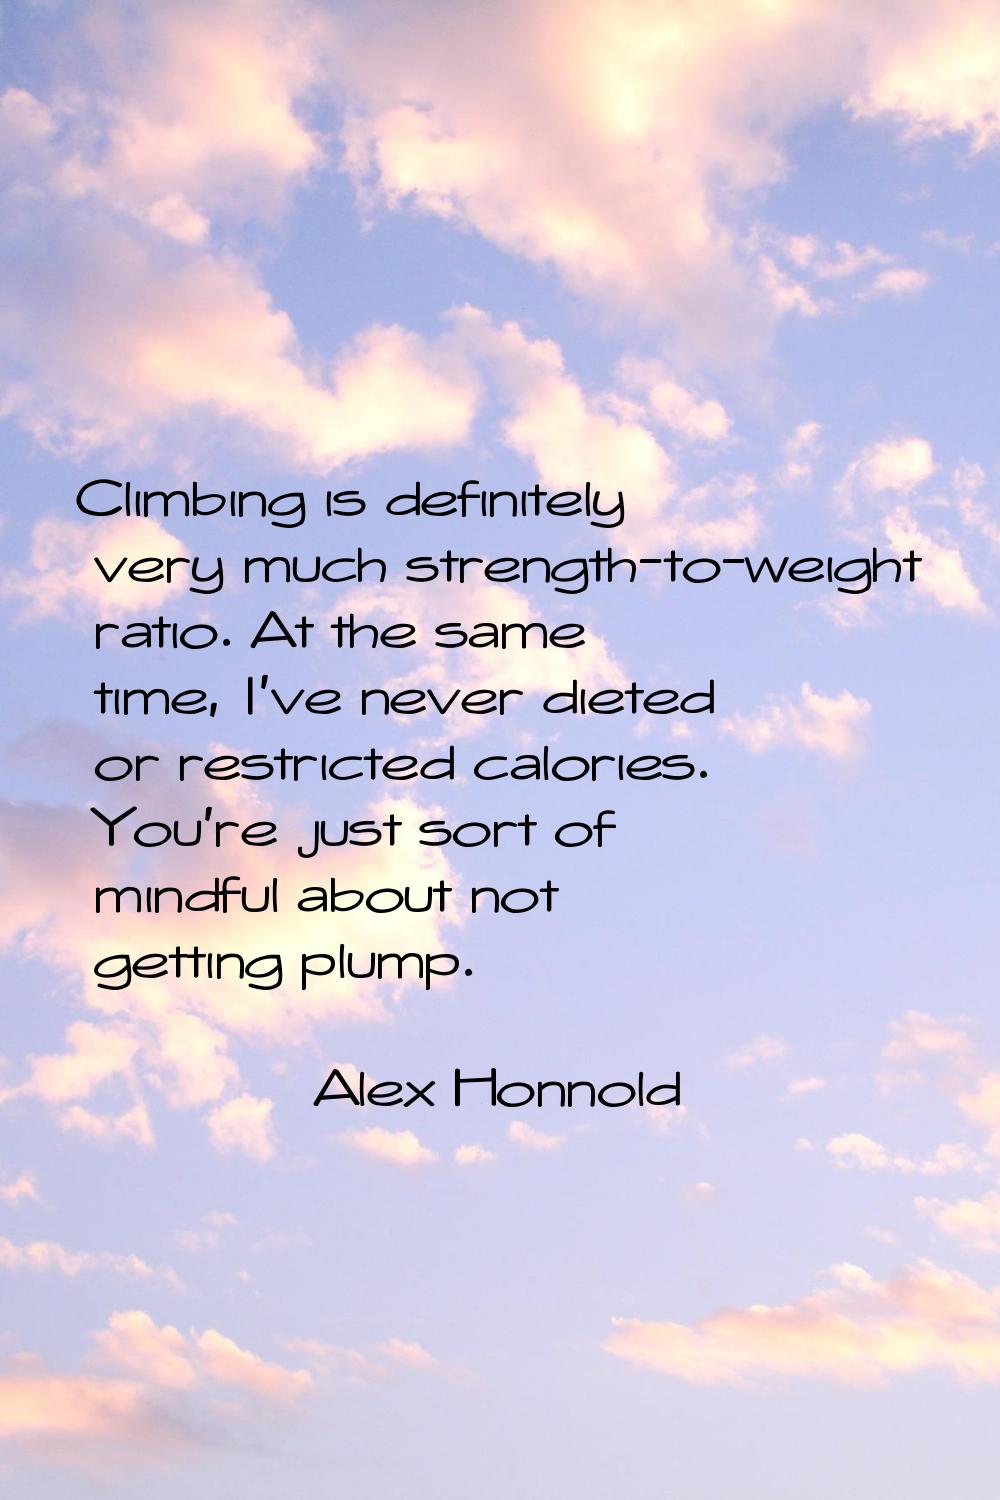 Climbing is definitely very much strength-to-weight ratio. At the same time, I've never dieted or r